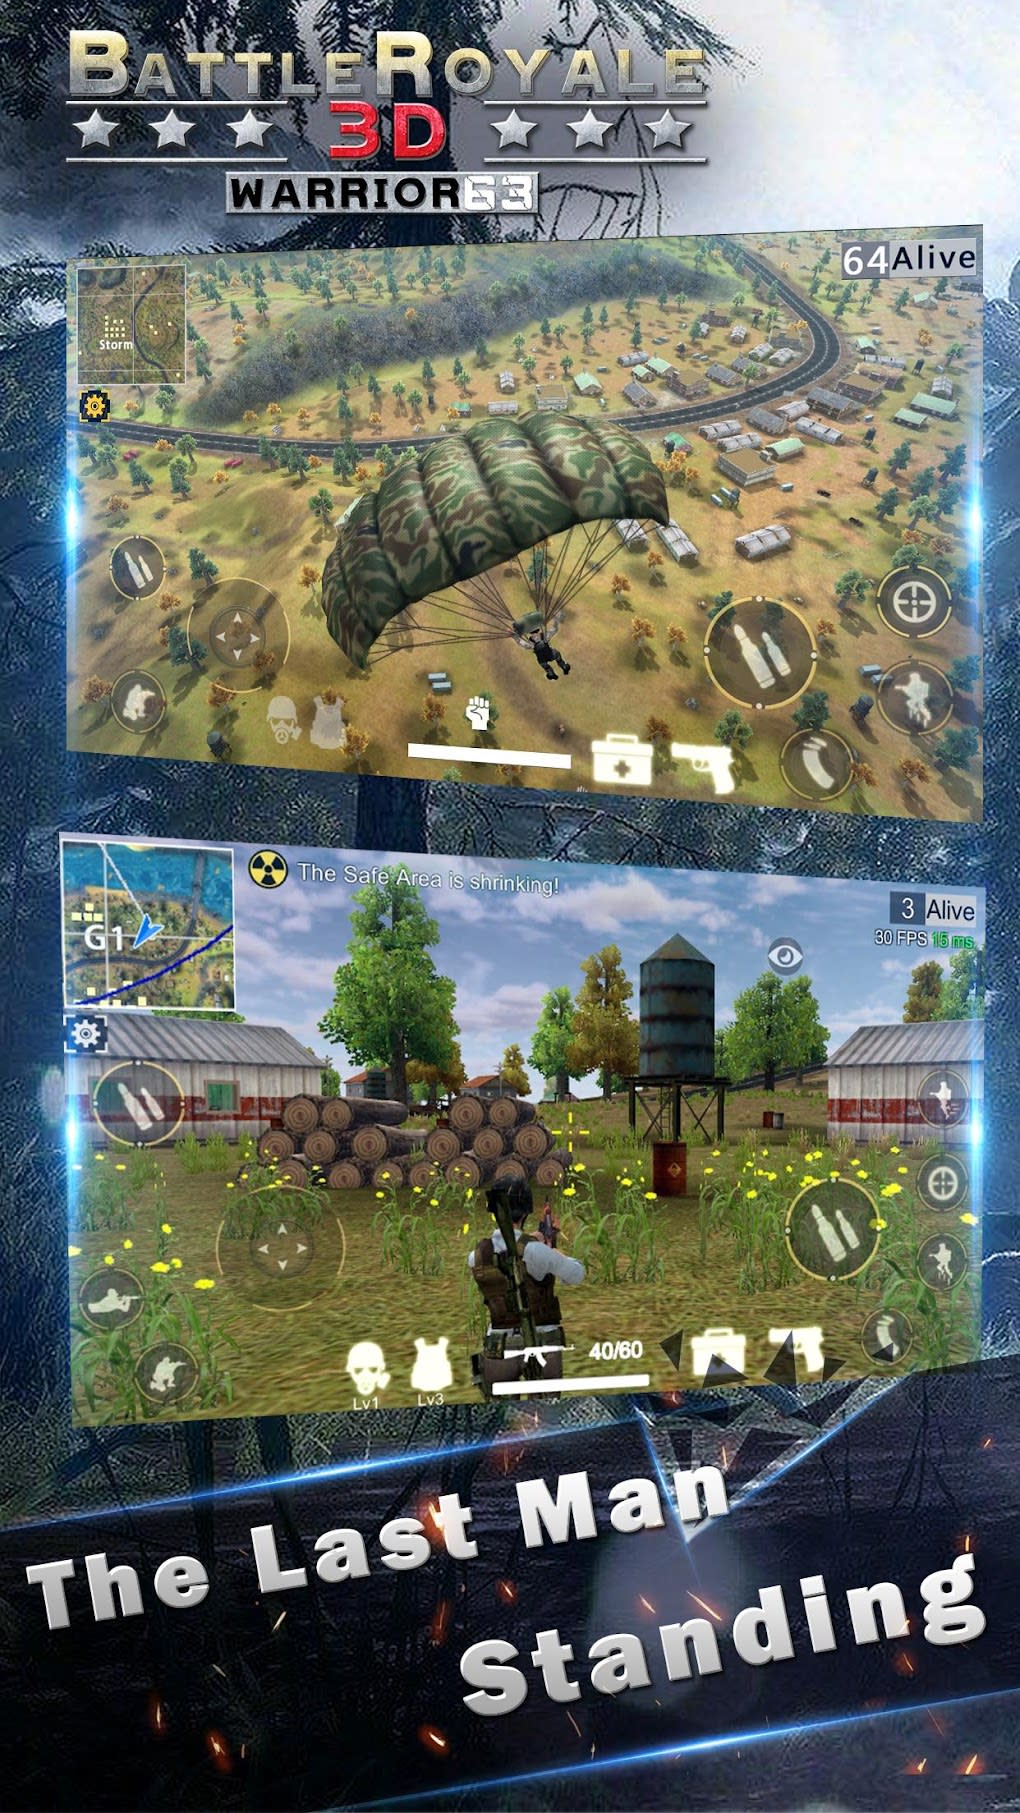 Battlefield Royale - The One APK for Android - Latest Version (Free  Download)